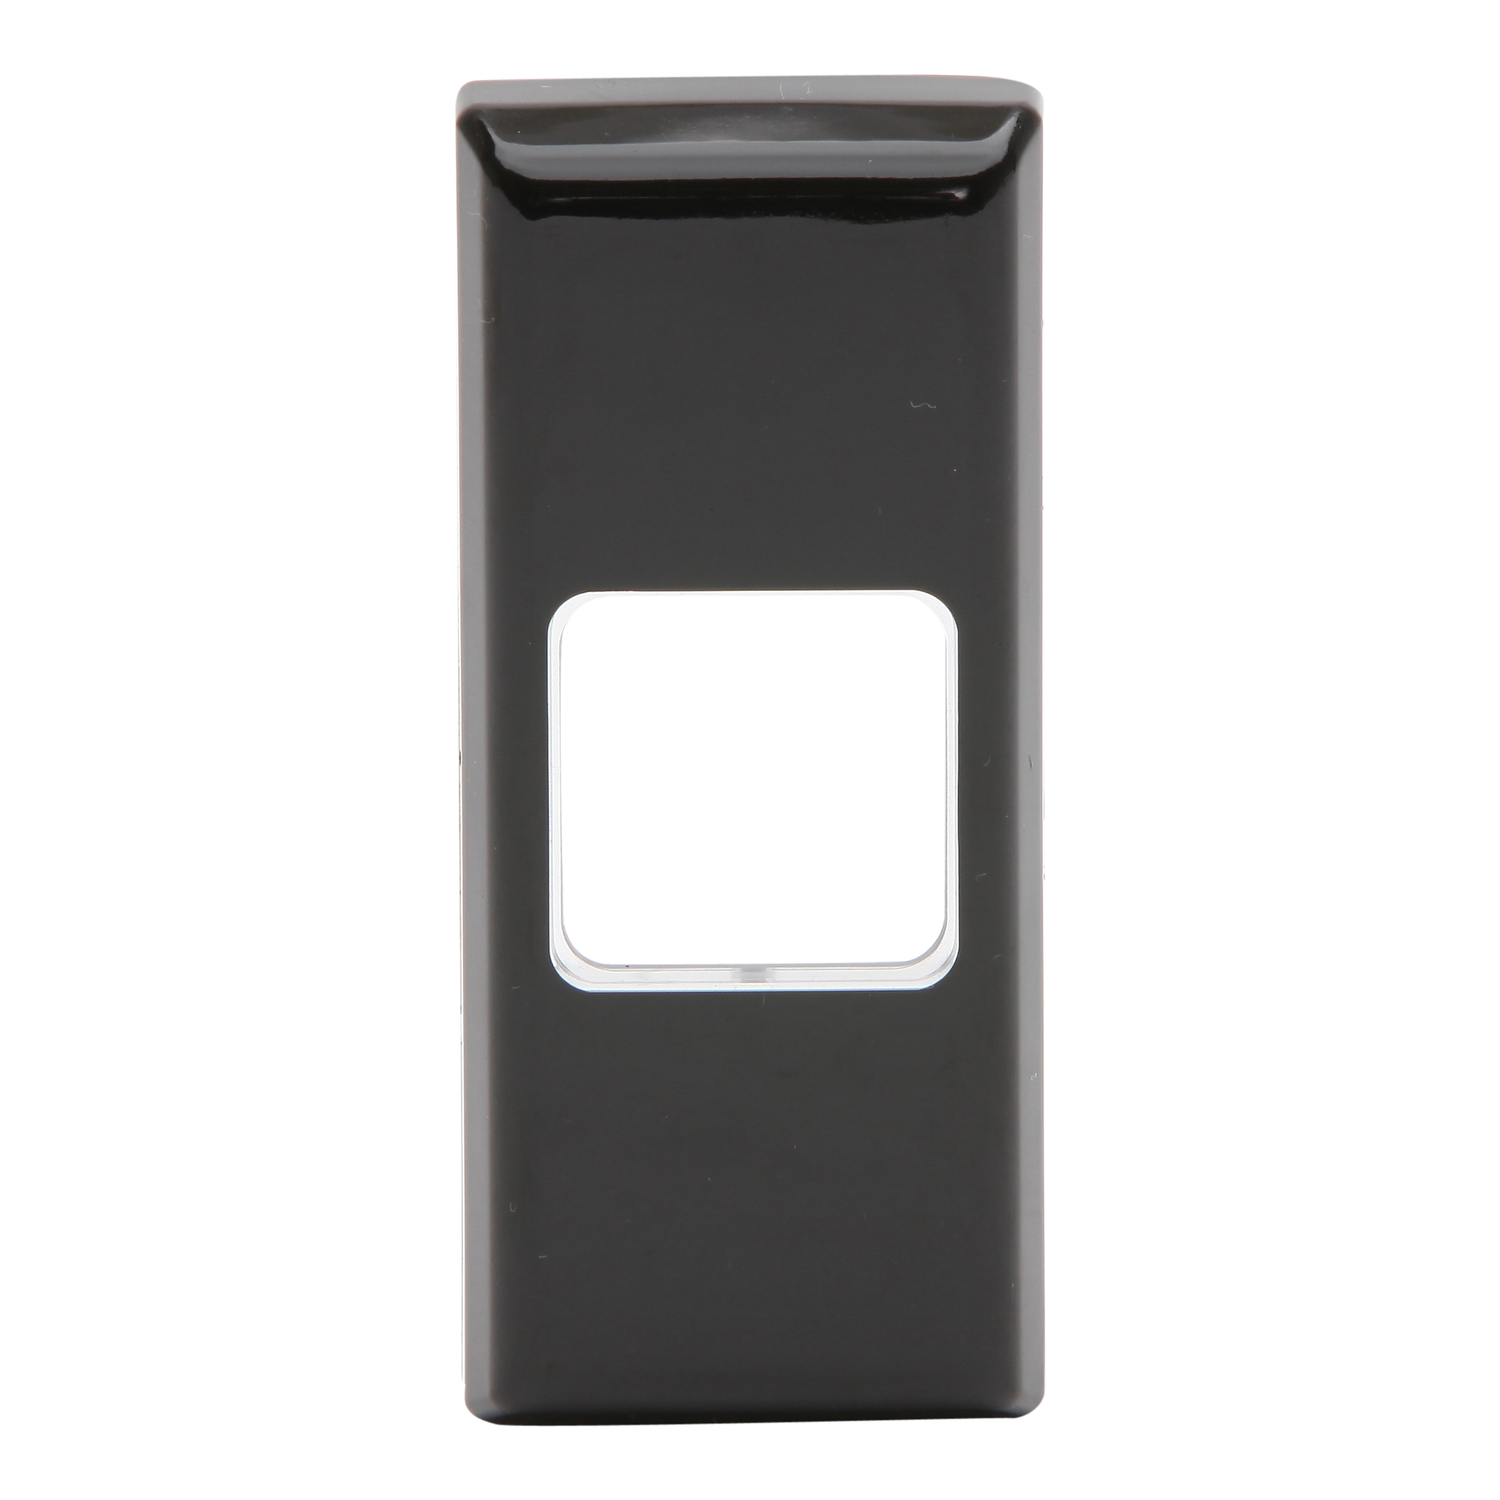 PDL 600 Series - Grid + Cover Architrave Switch 1-Gang - Black